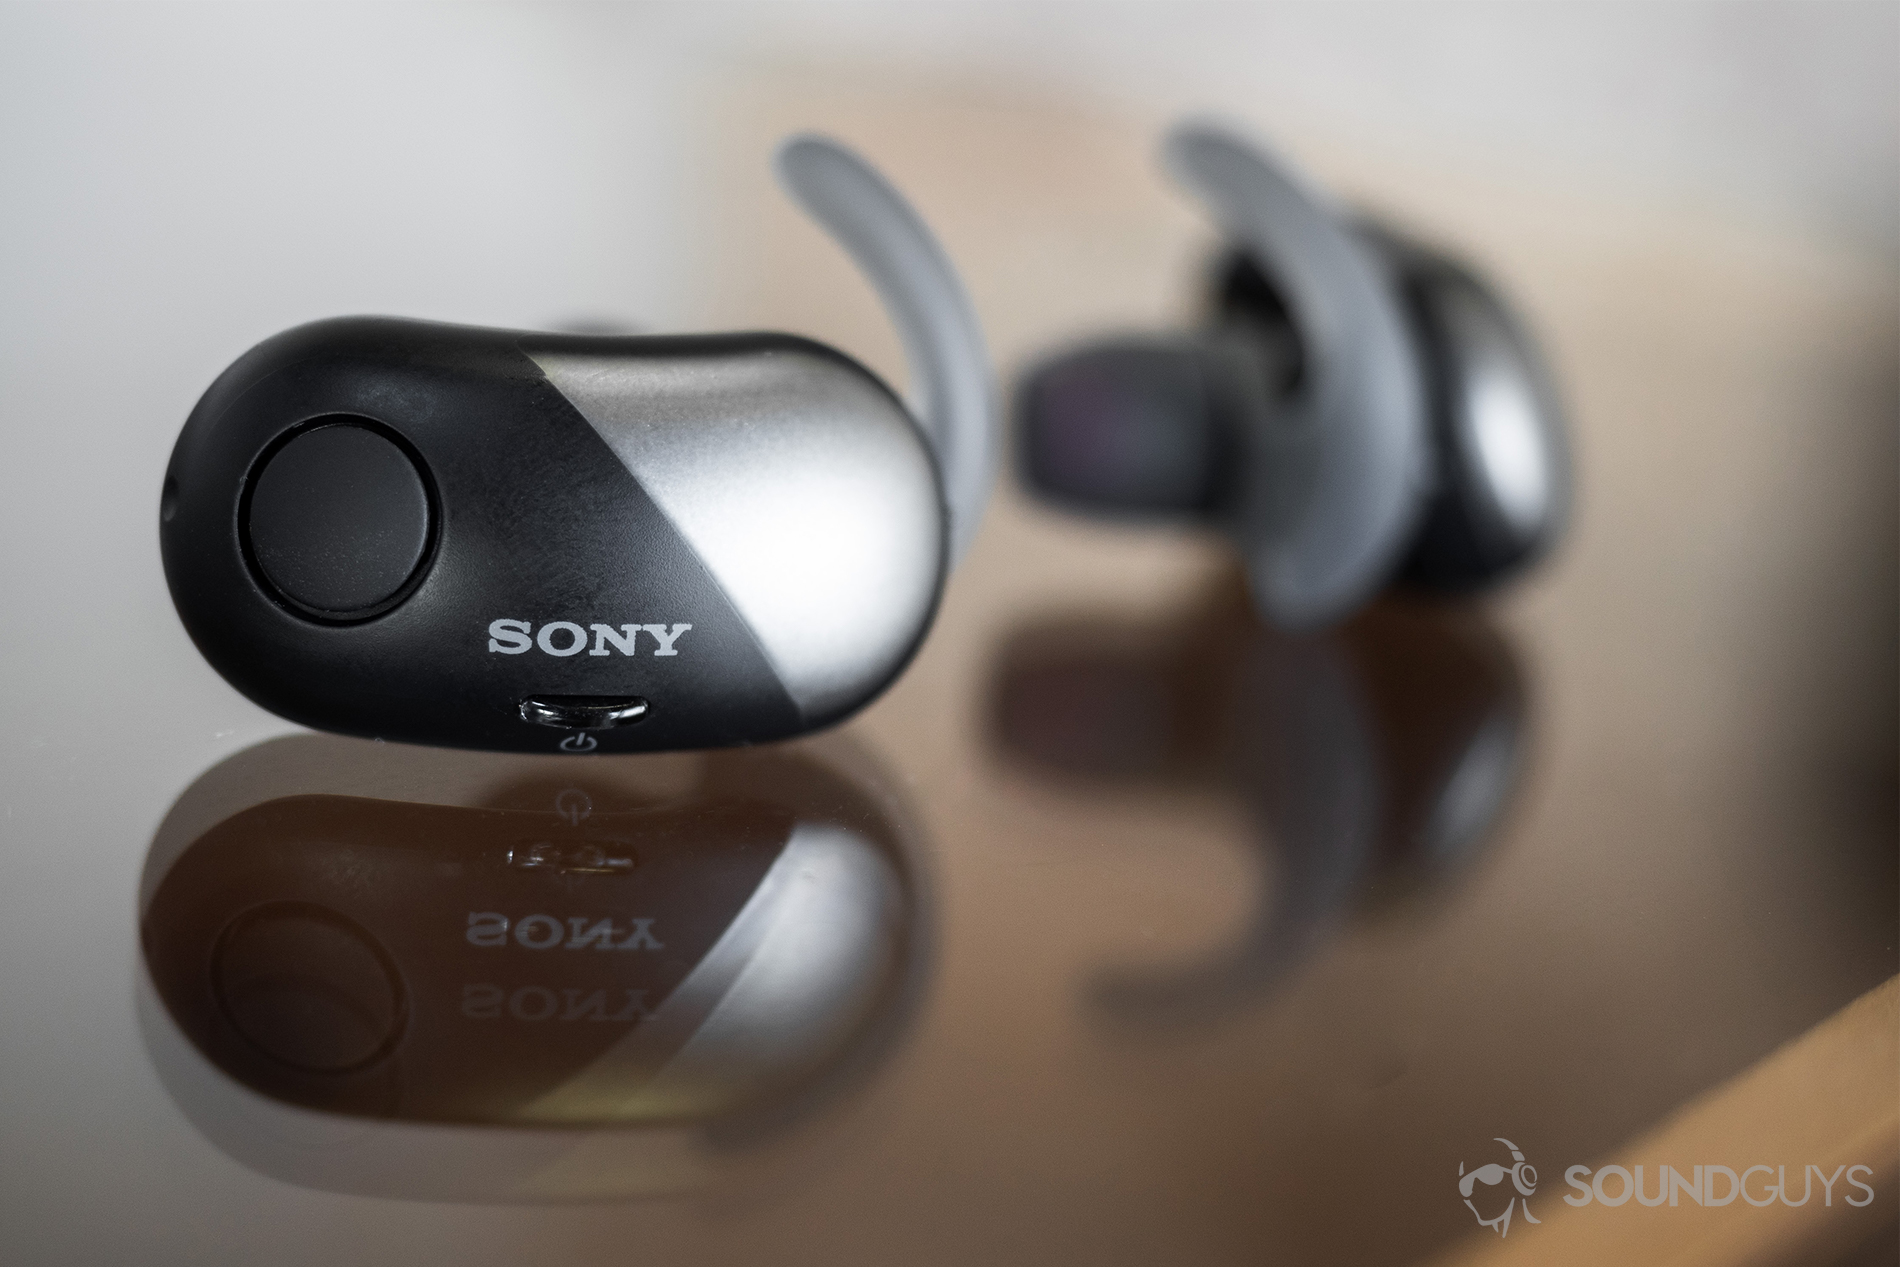 Sony WF-SP700N: The earbuds on a glass table